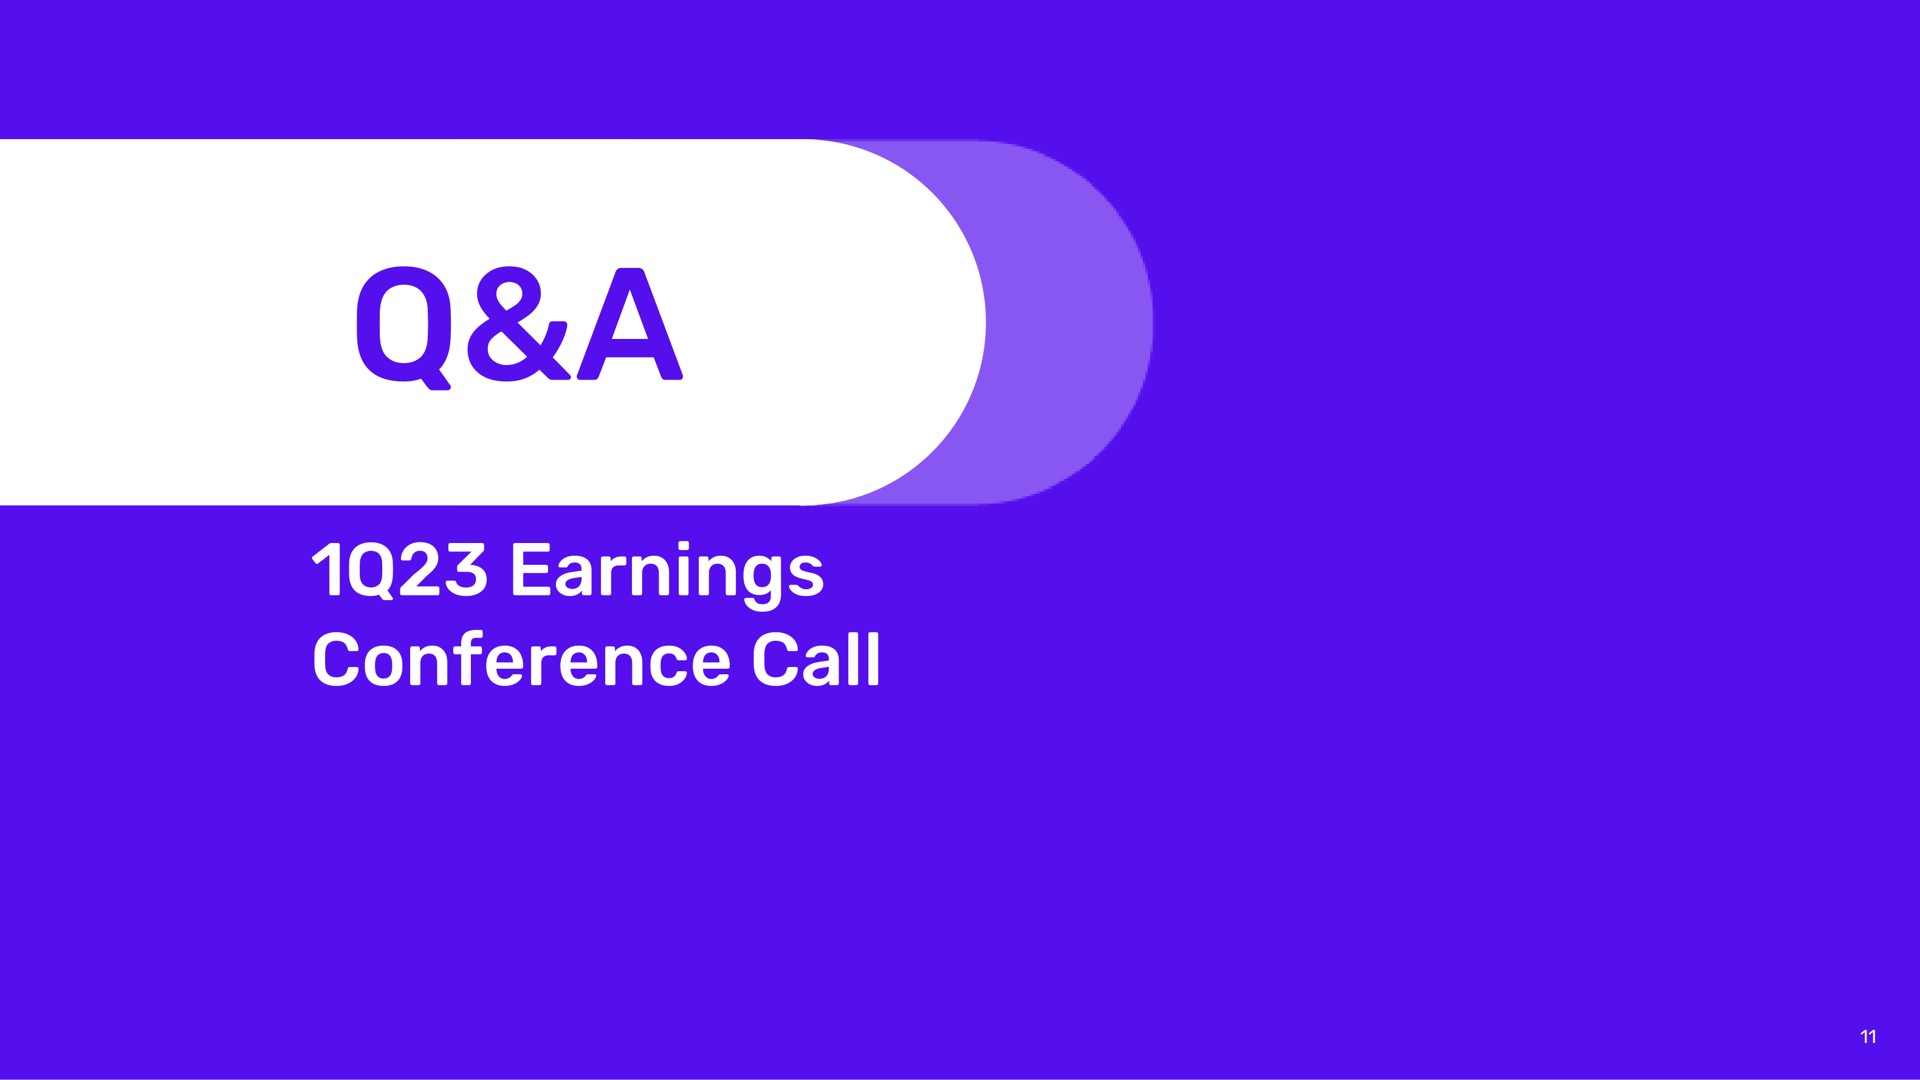 a earnings conference call | Despegar